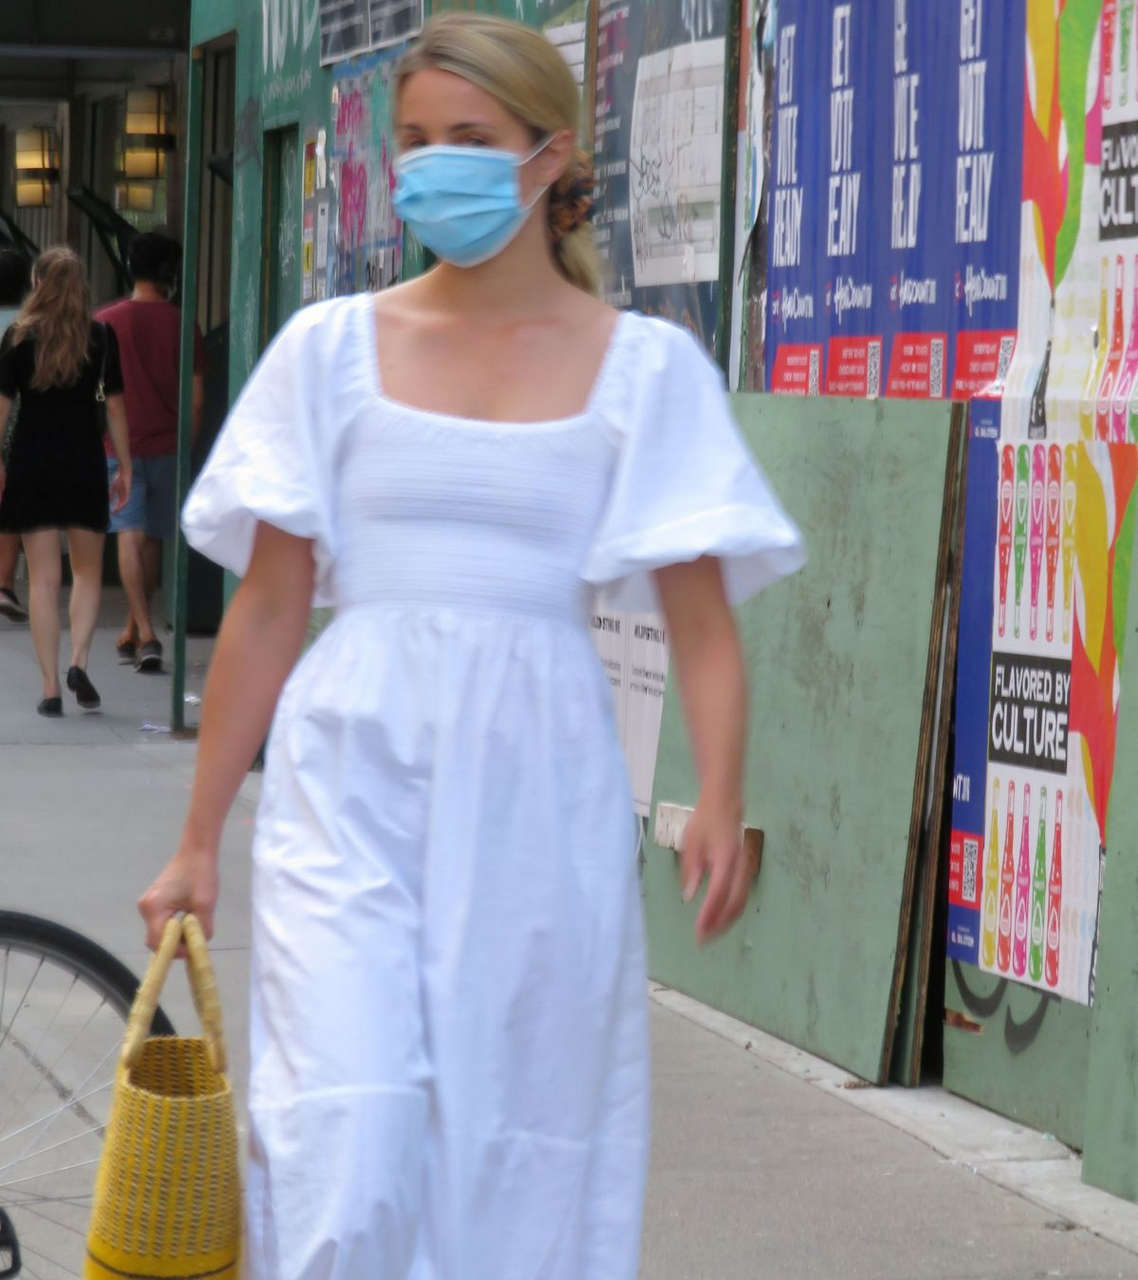 Dianna Agron Wearing Mask Out New York